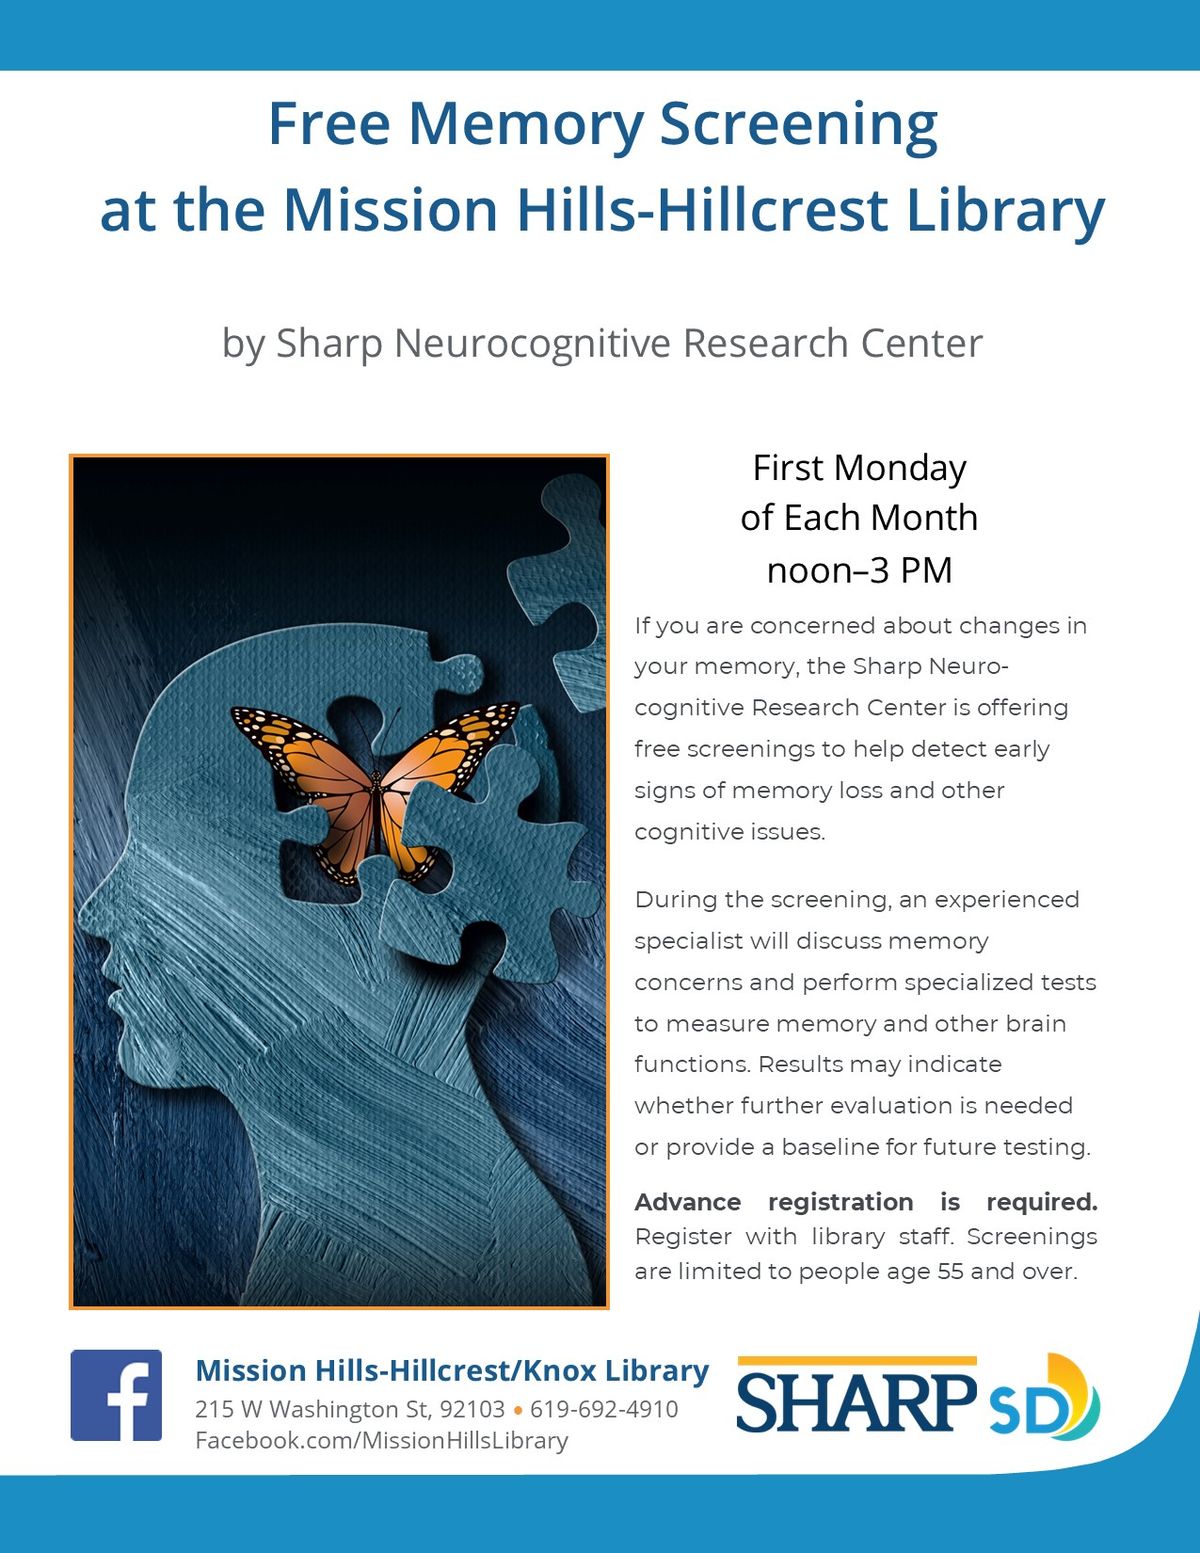 Free Memory Screenings at the Mission Hills-Hillcrest\/Knox Branch Library